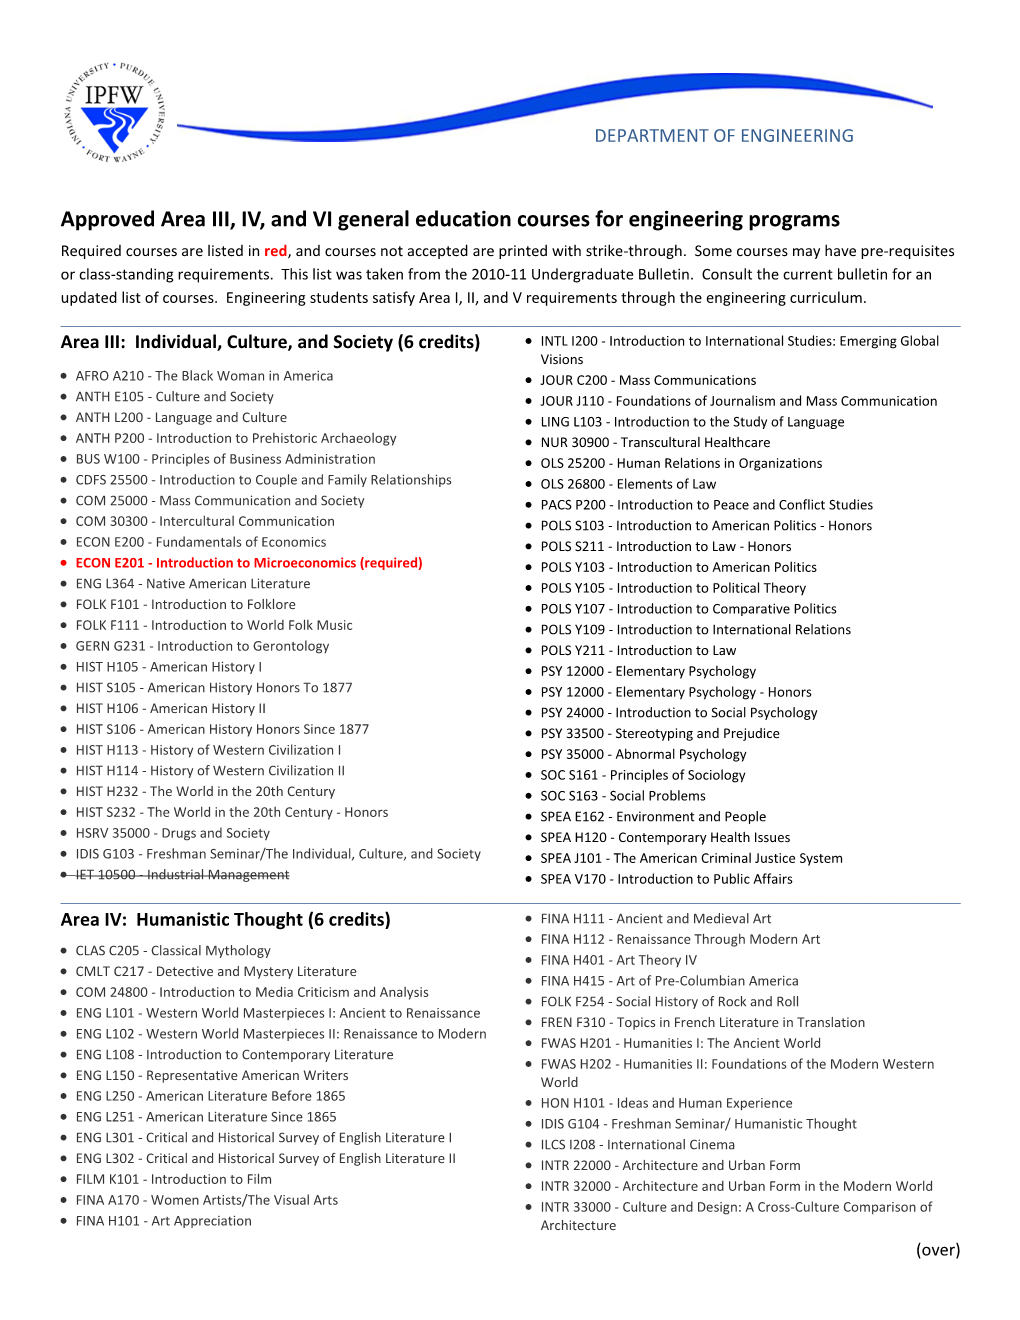 Approved Area III, IV, and VI General Education Courses for Engineering